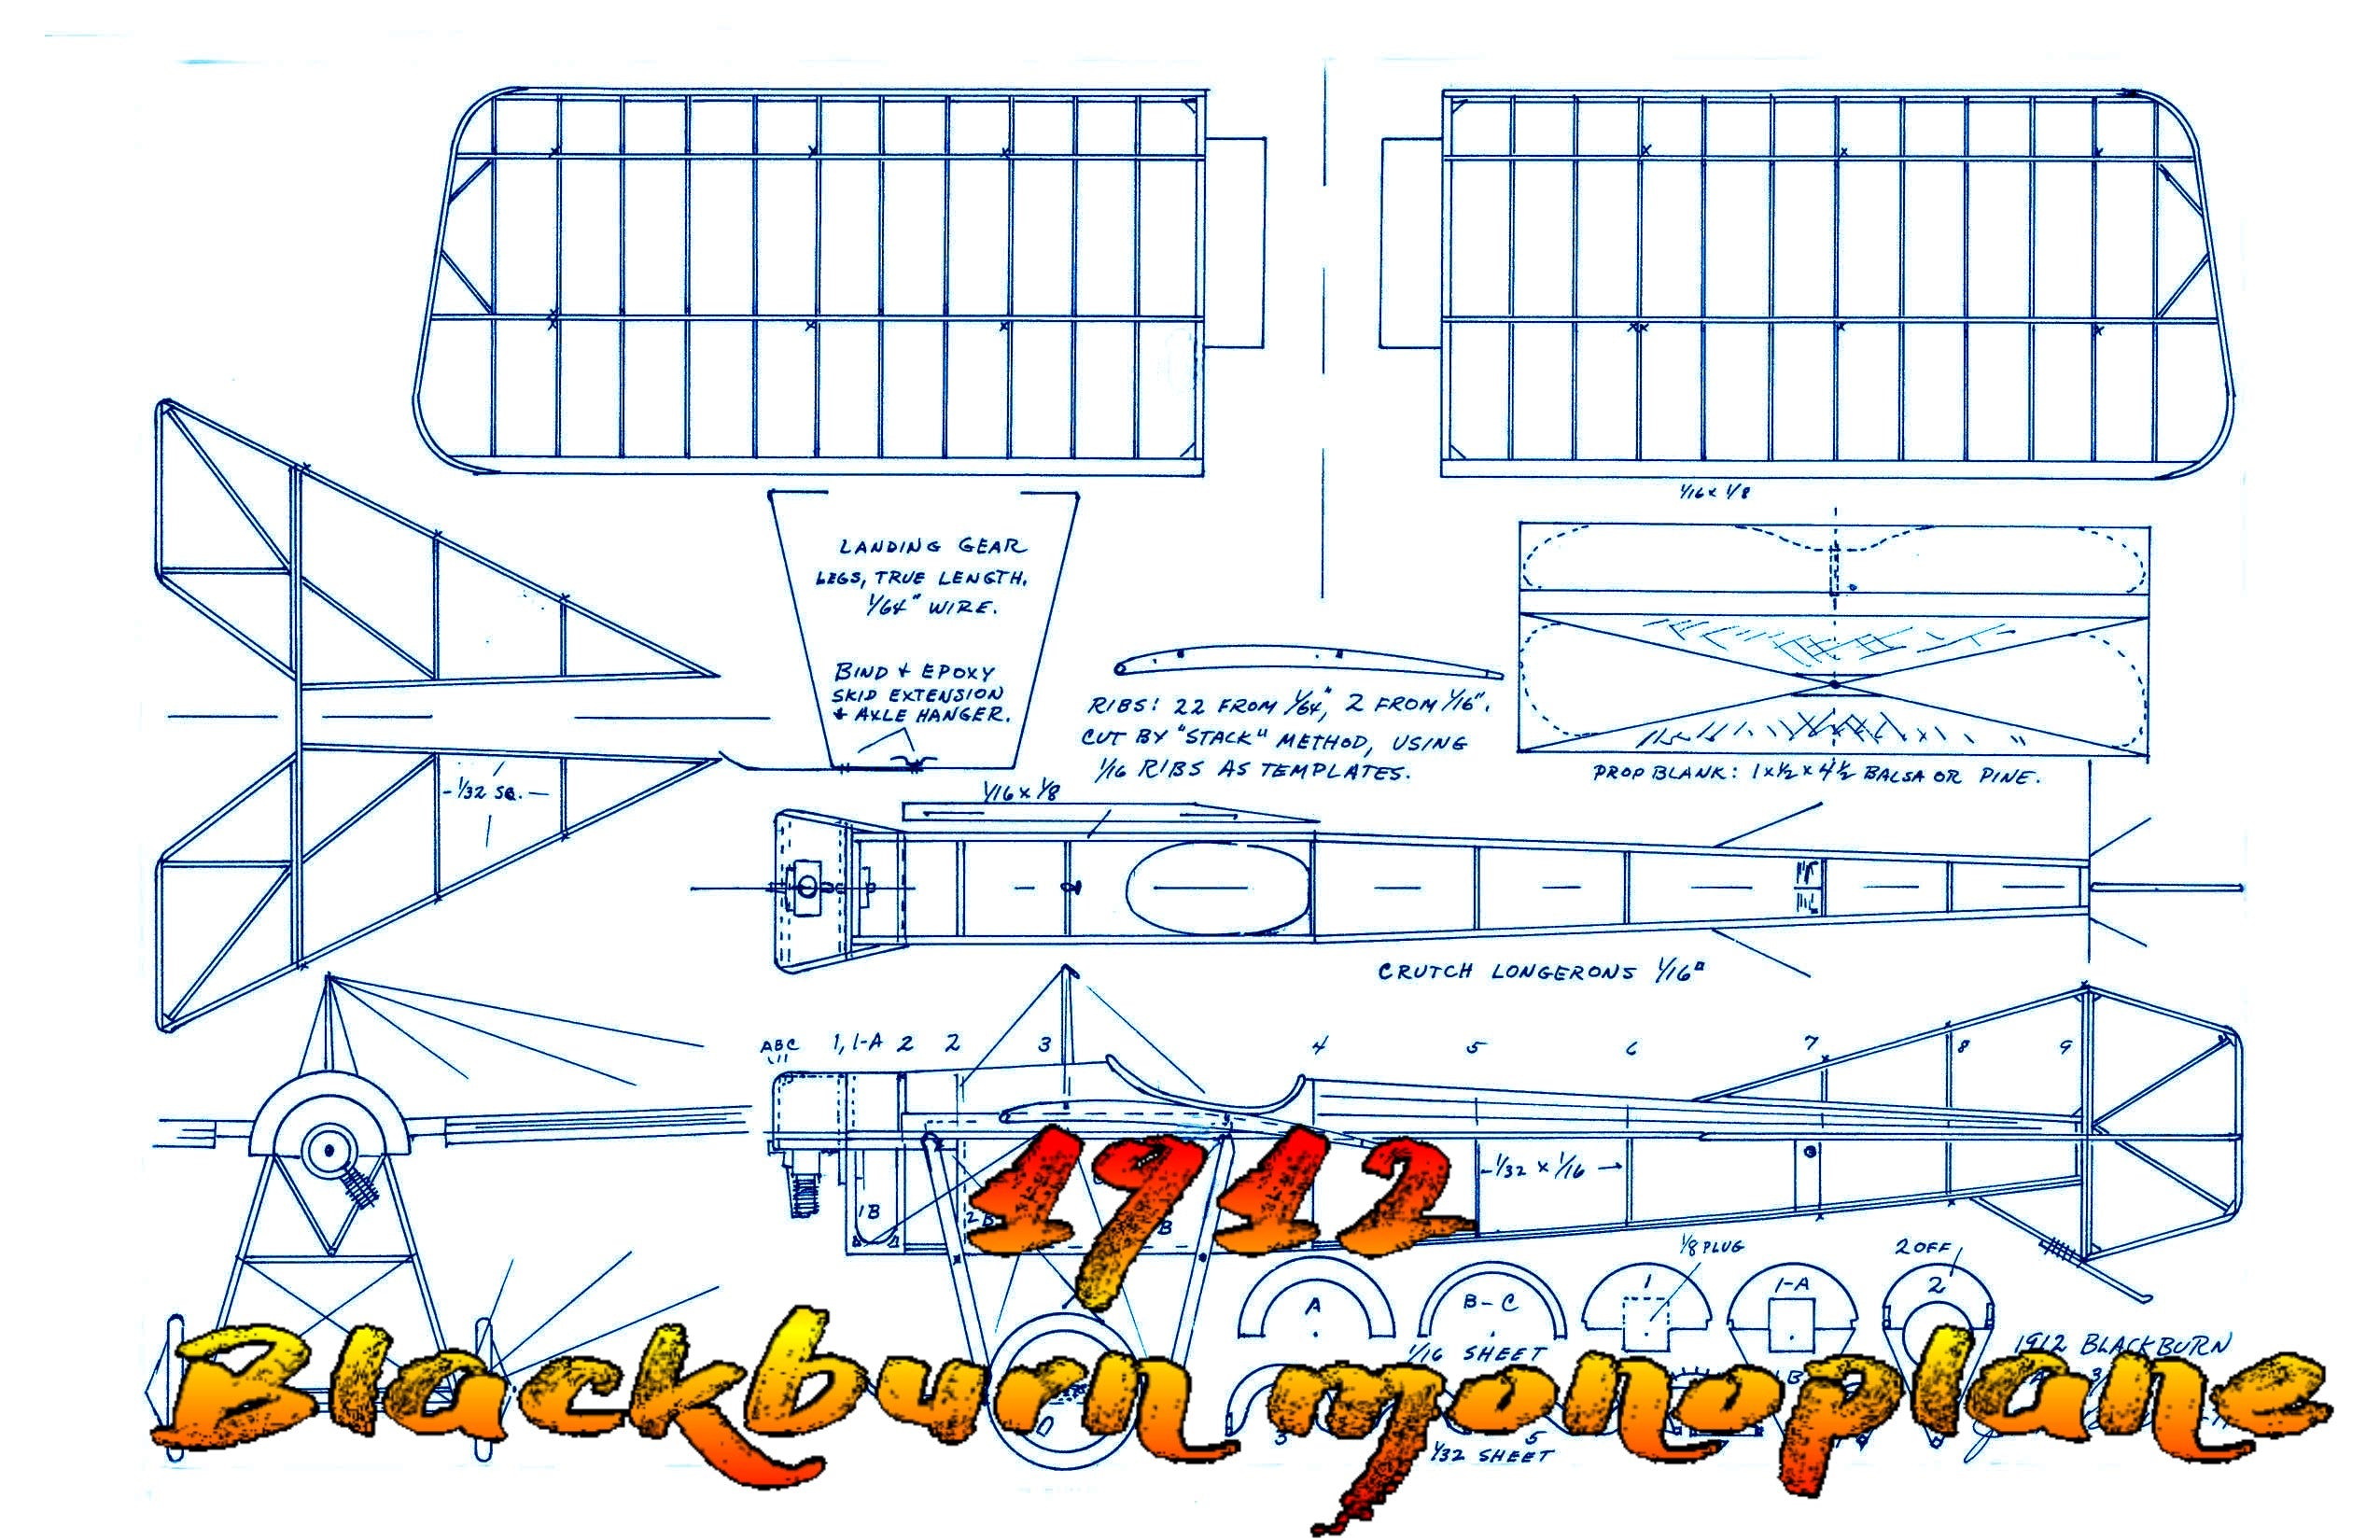 full size printed peanut scale plans 1912 blackburn monoplane build this winner for yourself.